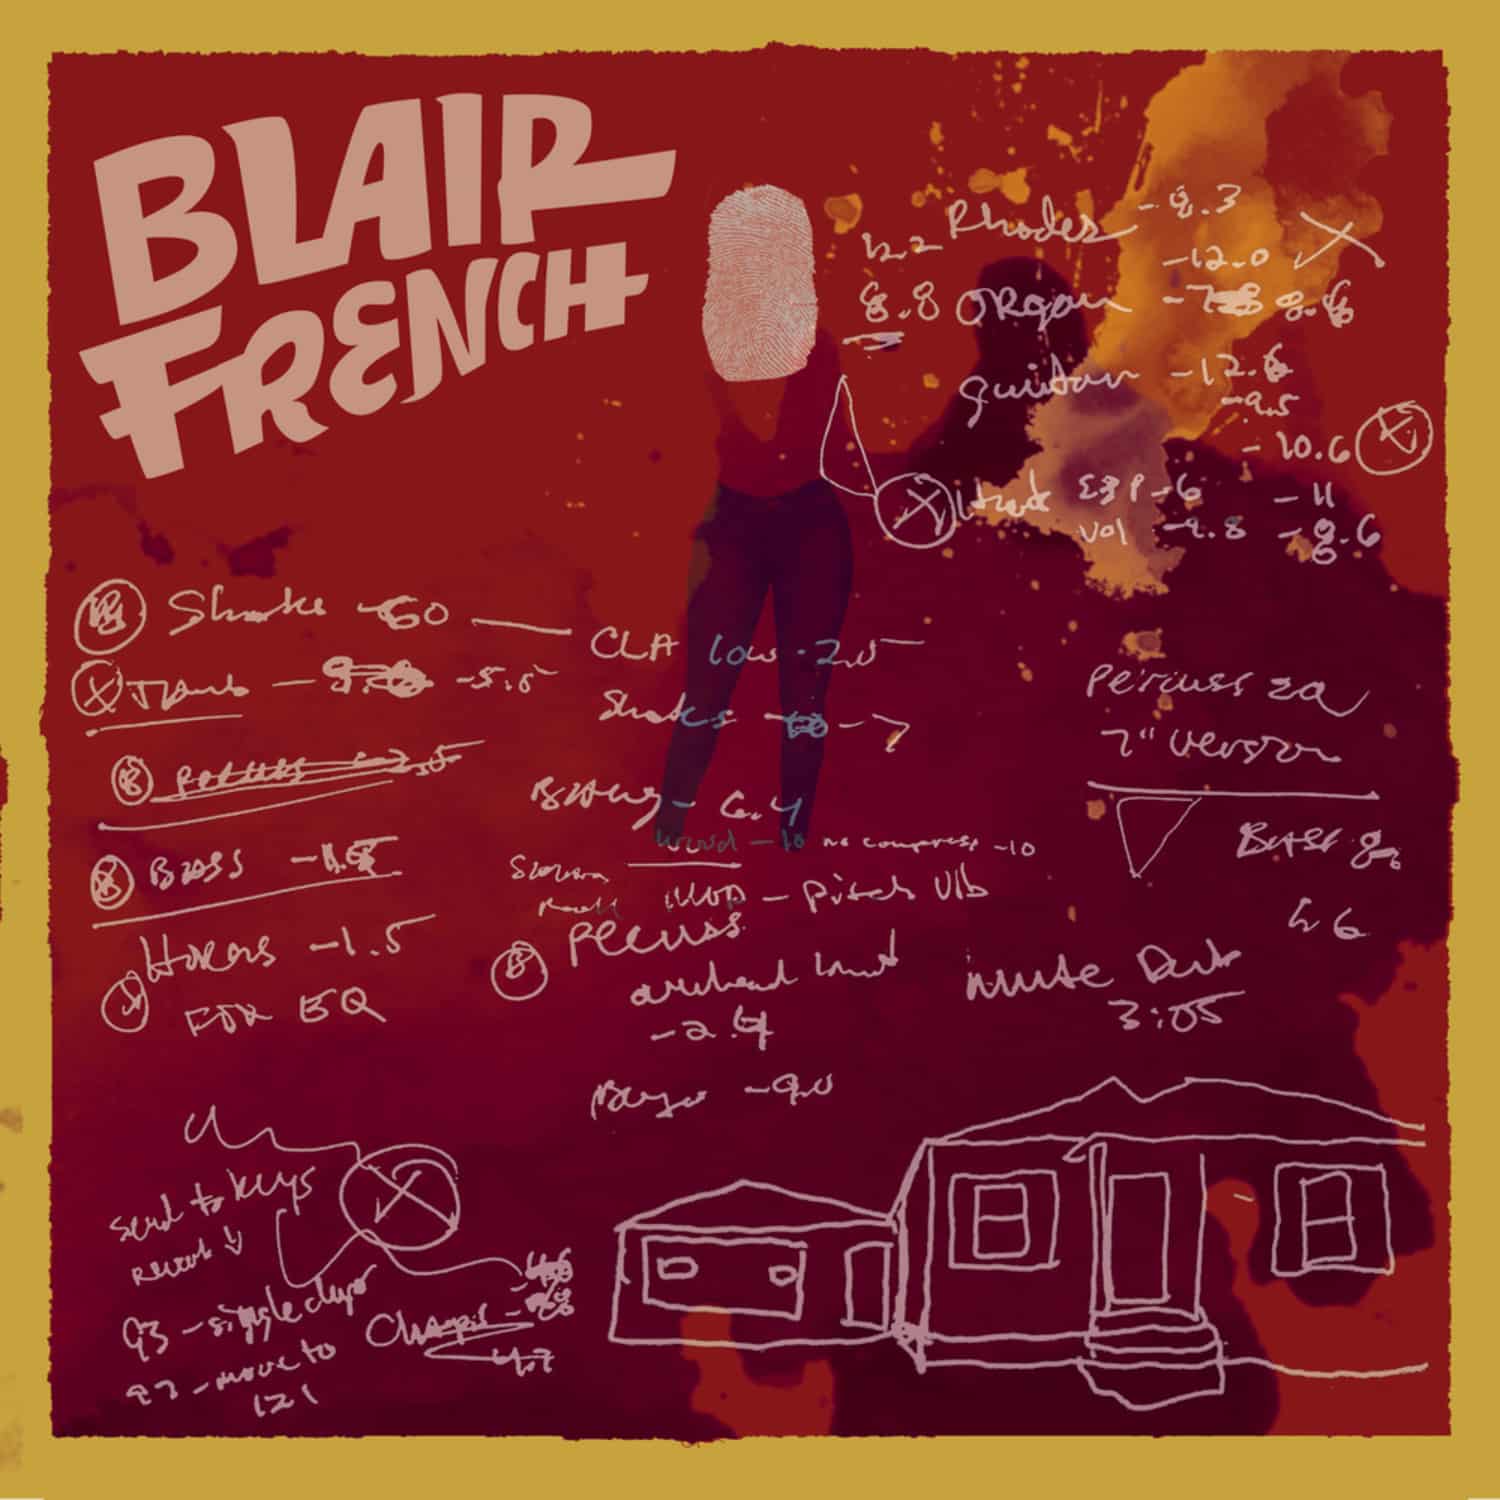 Blair French - GENES / SPACE CONDUCTOR 